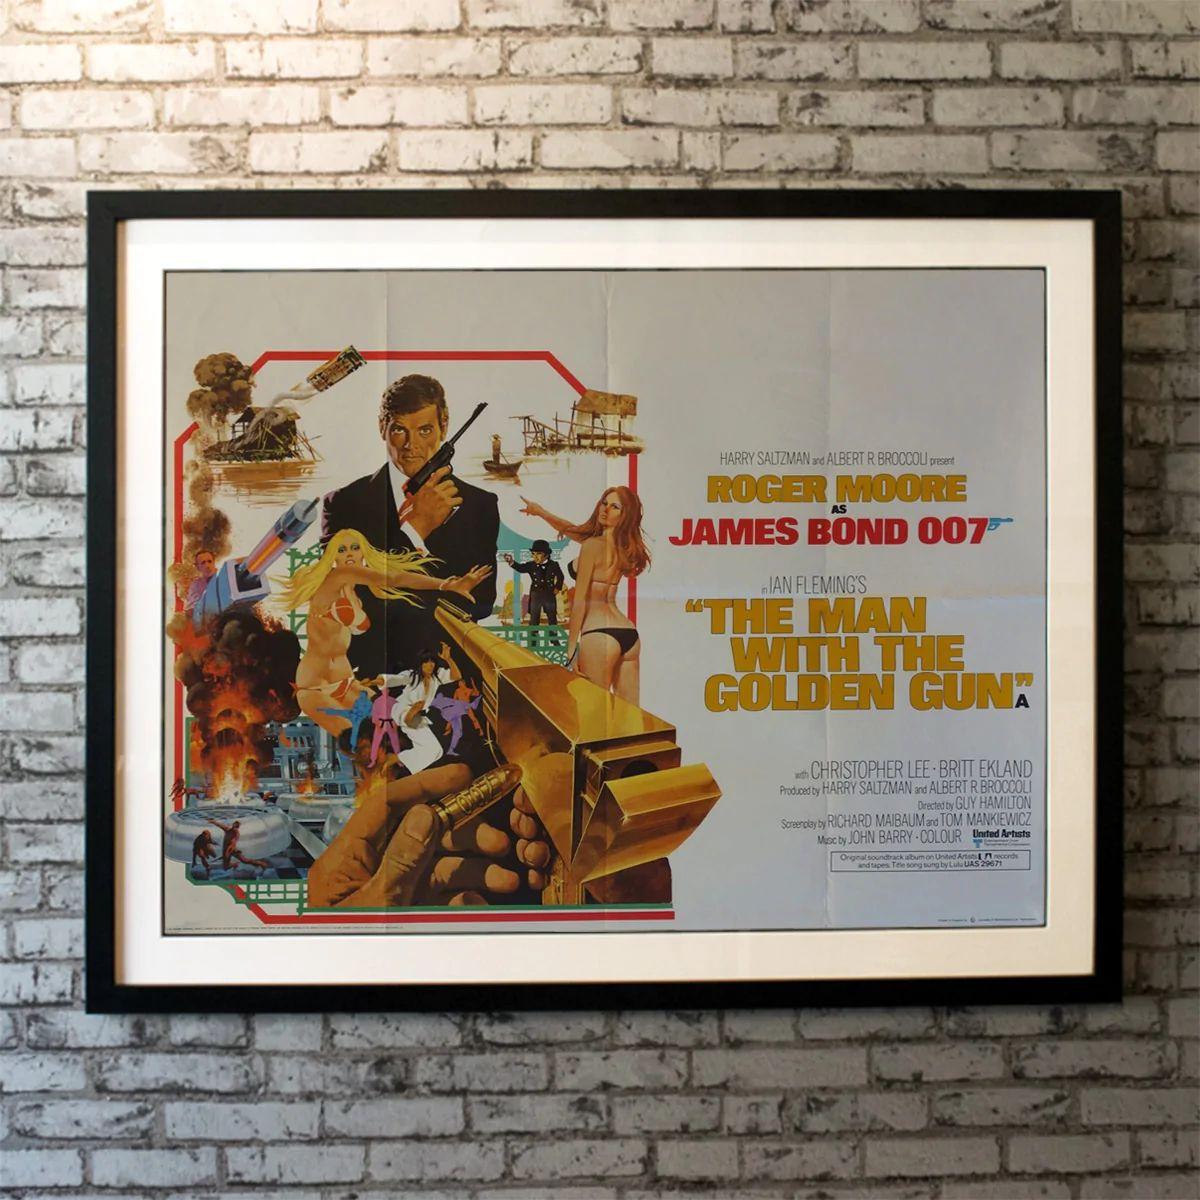 The Man with The Golden Gun, Unframed Poster, 1974

James Bond is targeted by the world's most expensive assassin, while he attempts to recover sensitive solar cell technology that is being sold to the highest bidder.

Year: 1974
Nationality: